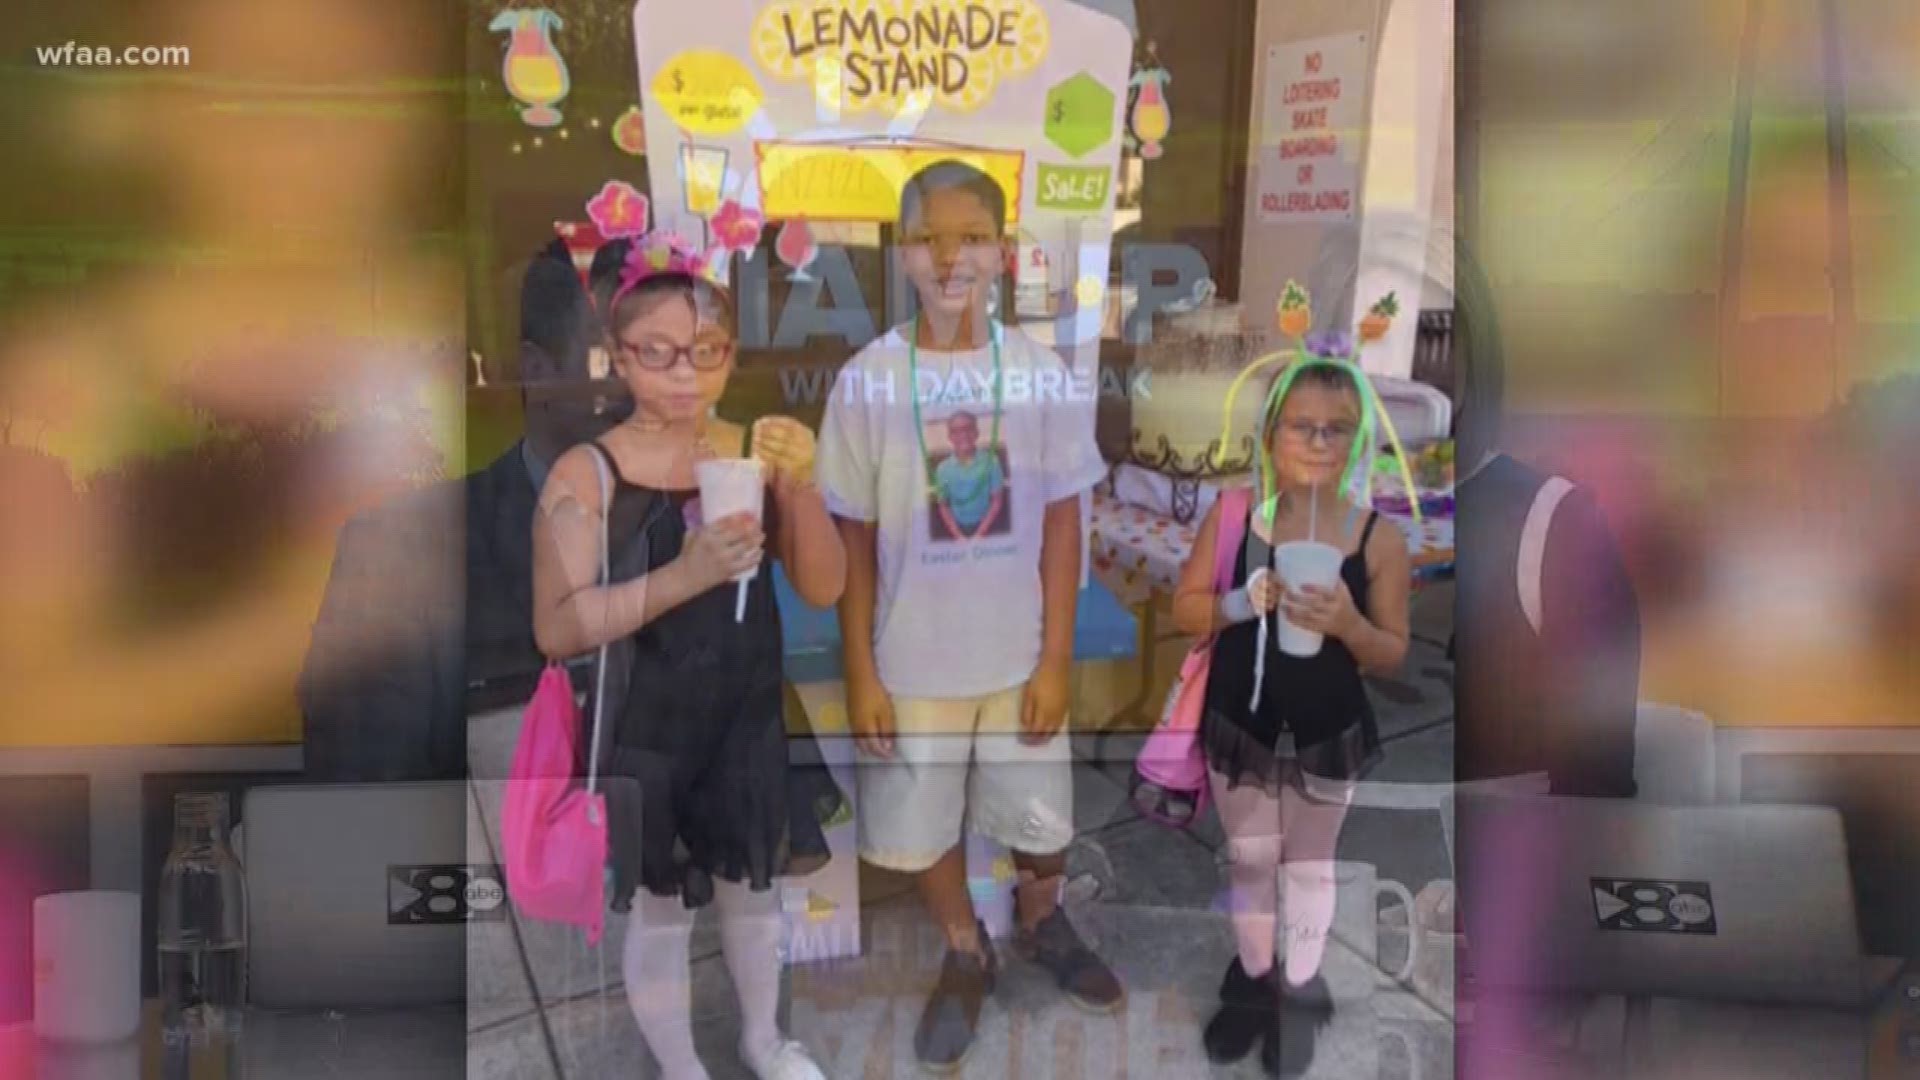 When life gives you lemons: 11-year-old hosts lemonade stands to buy backpacks for classmate